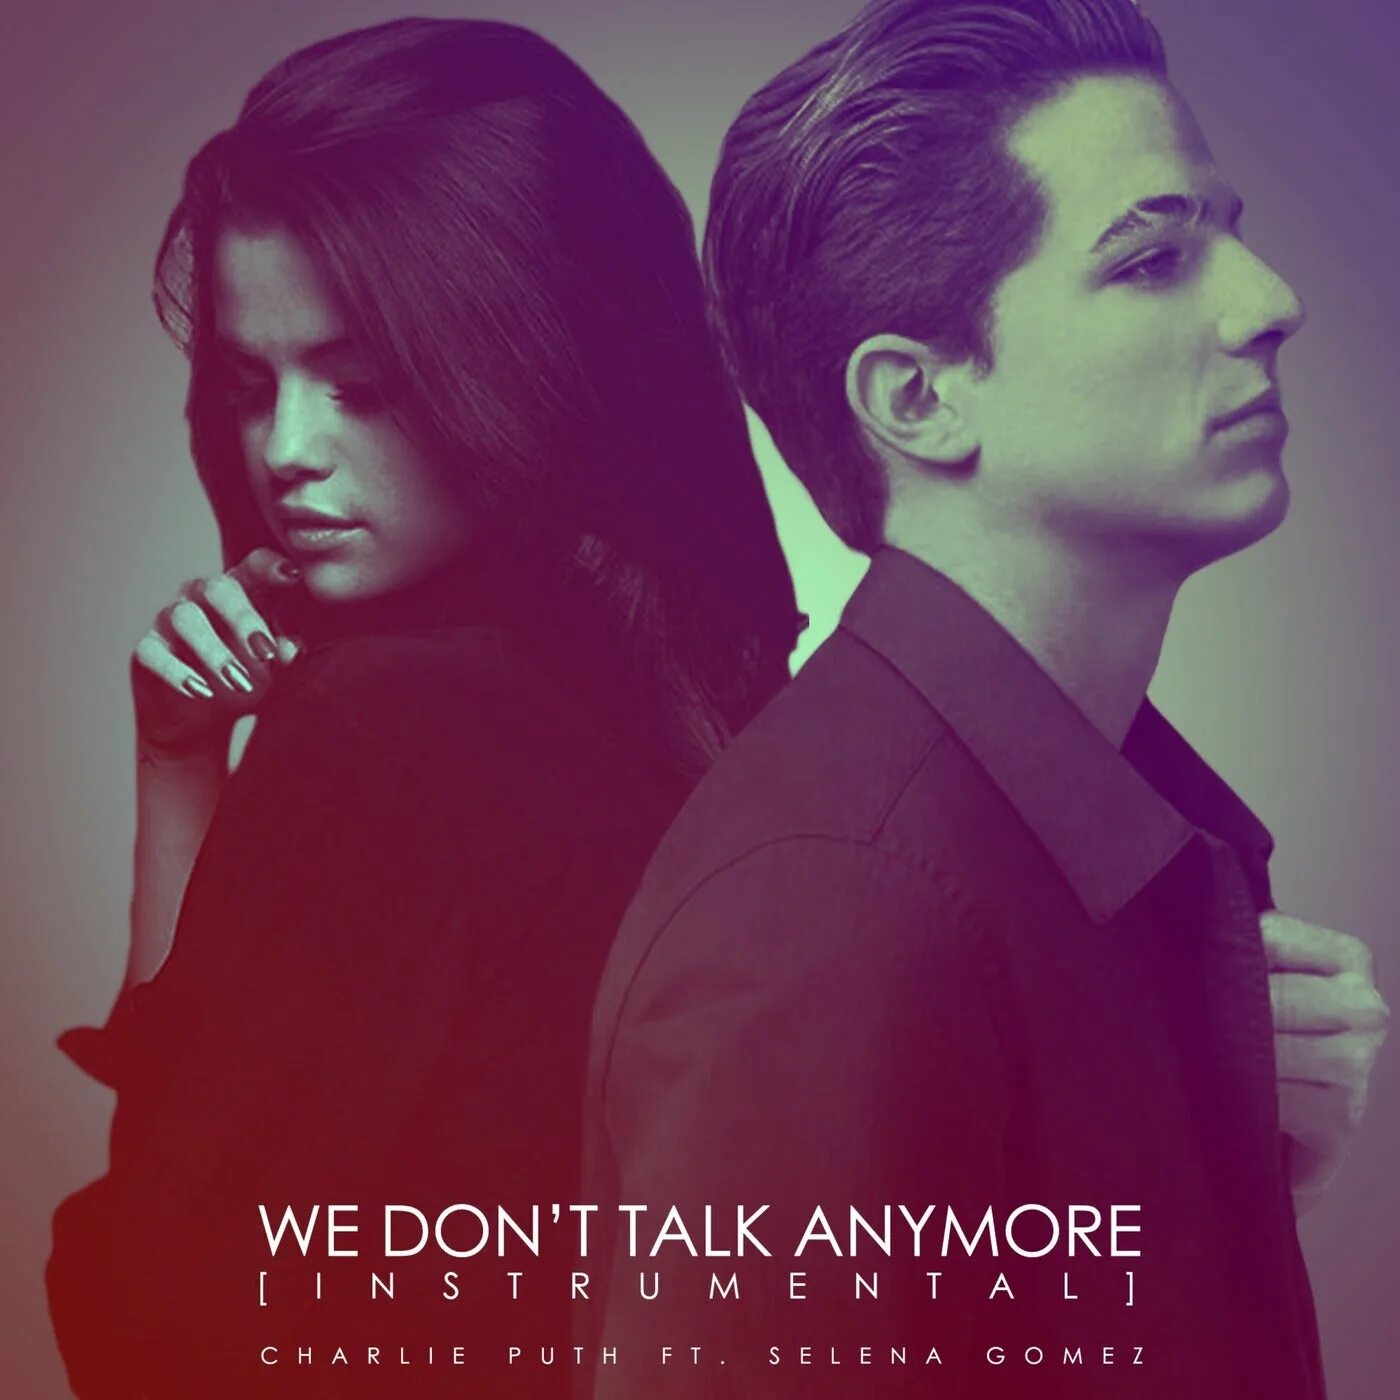 We talk anymore. We don't talk anymore обложка. We don't talk anymore BTS обложка. Charlie puth we don t talk anymore